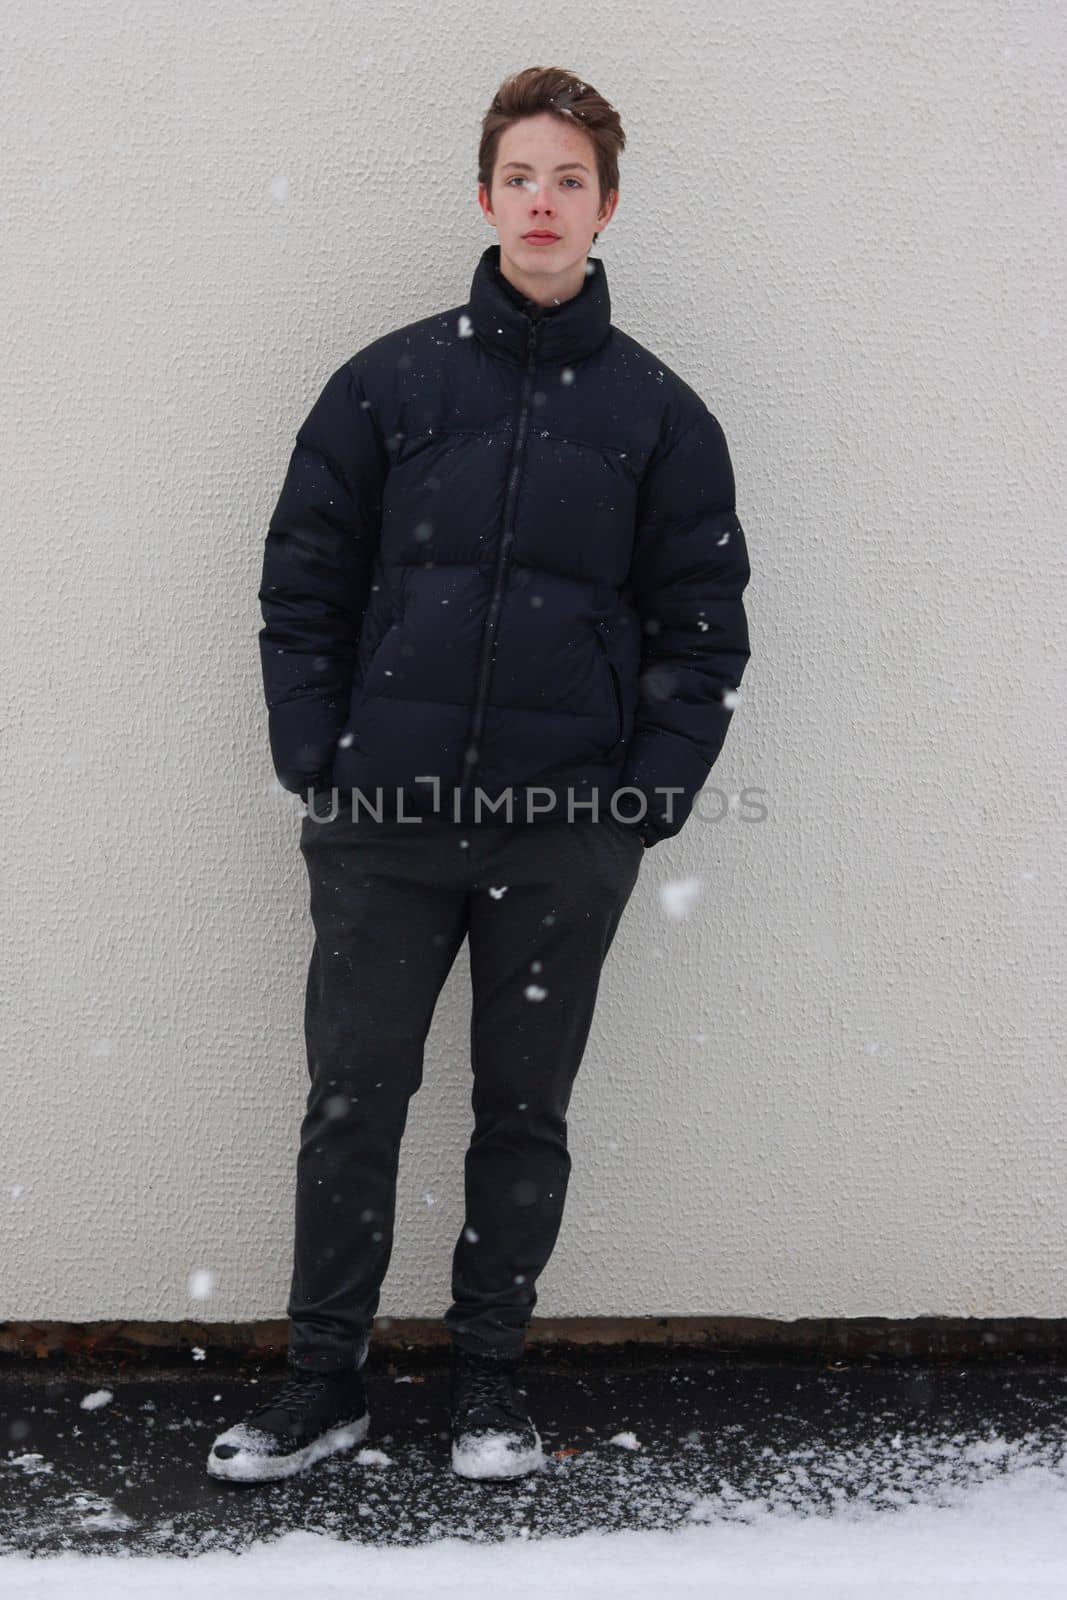 Cute teenage boy at full height in front of a wall in snowy weather. Boy holding hands in pockets during snowfall